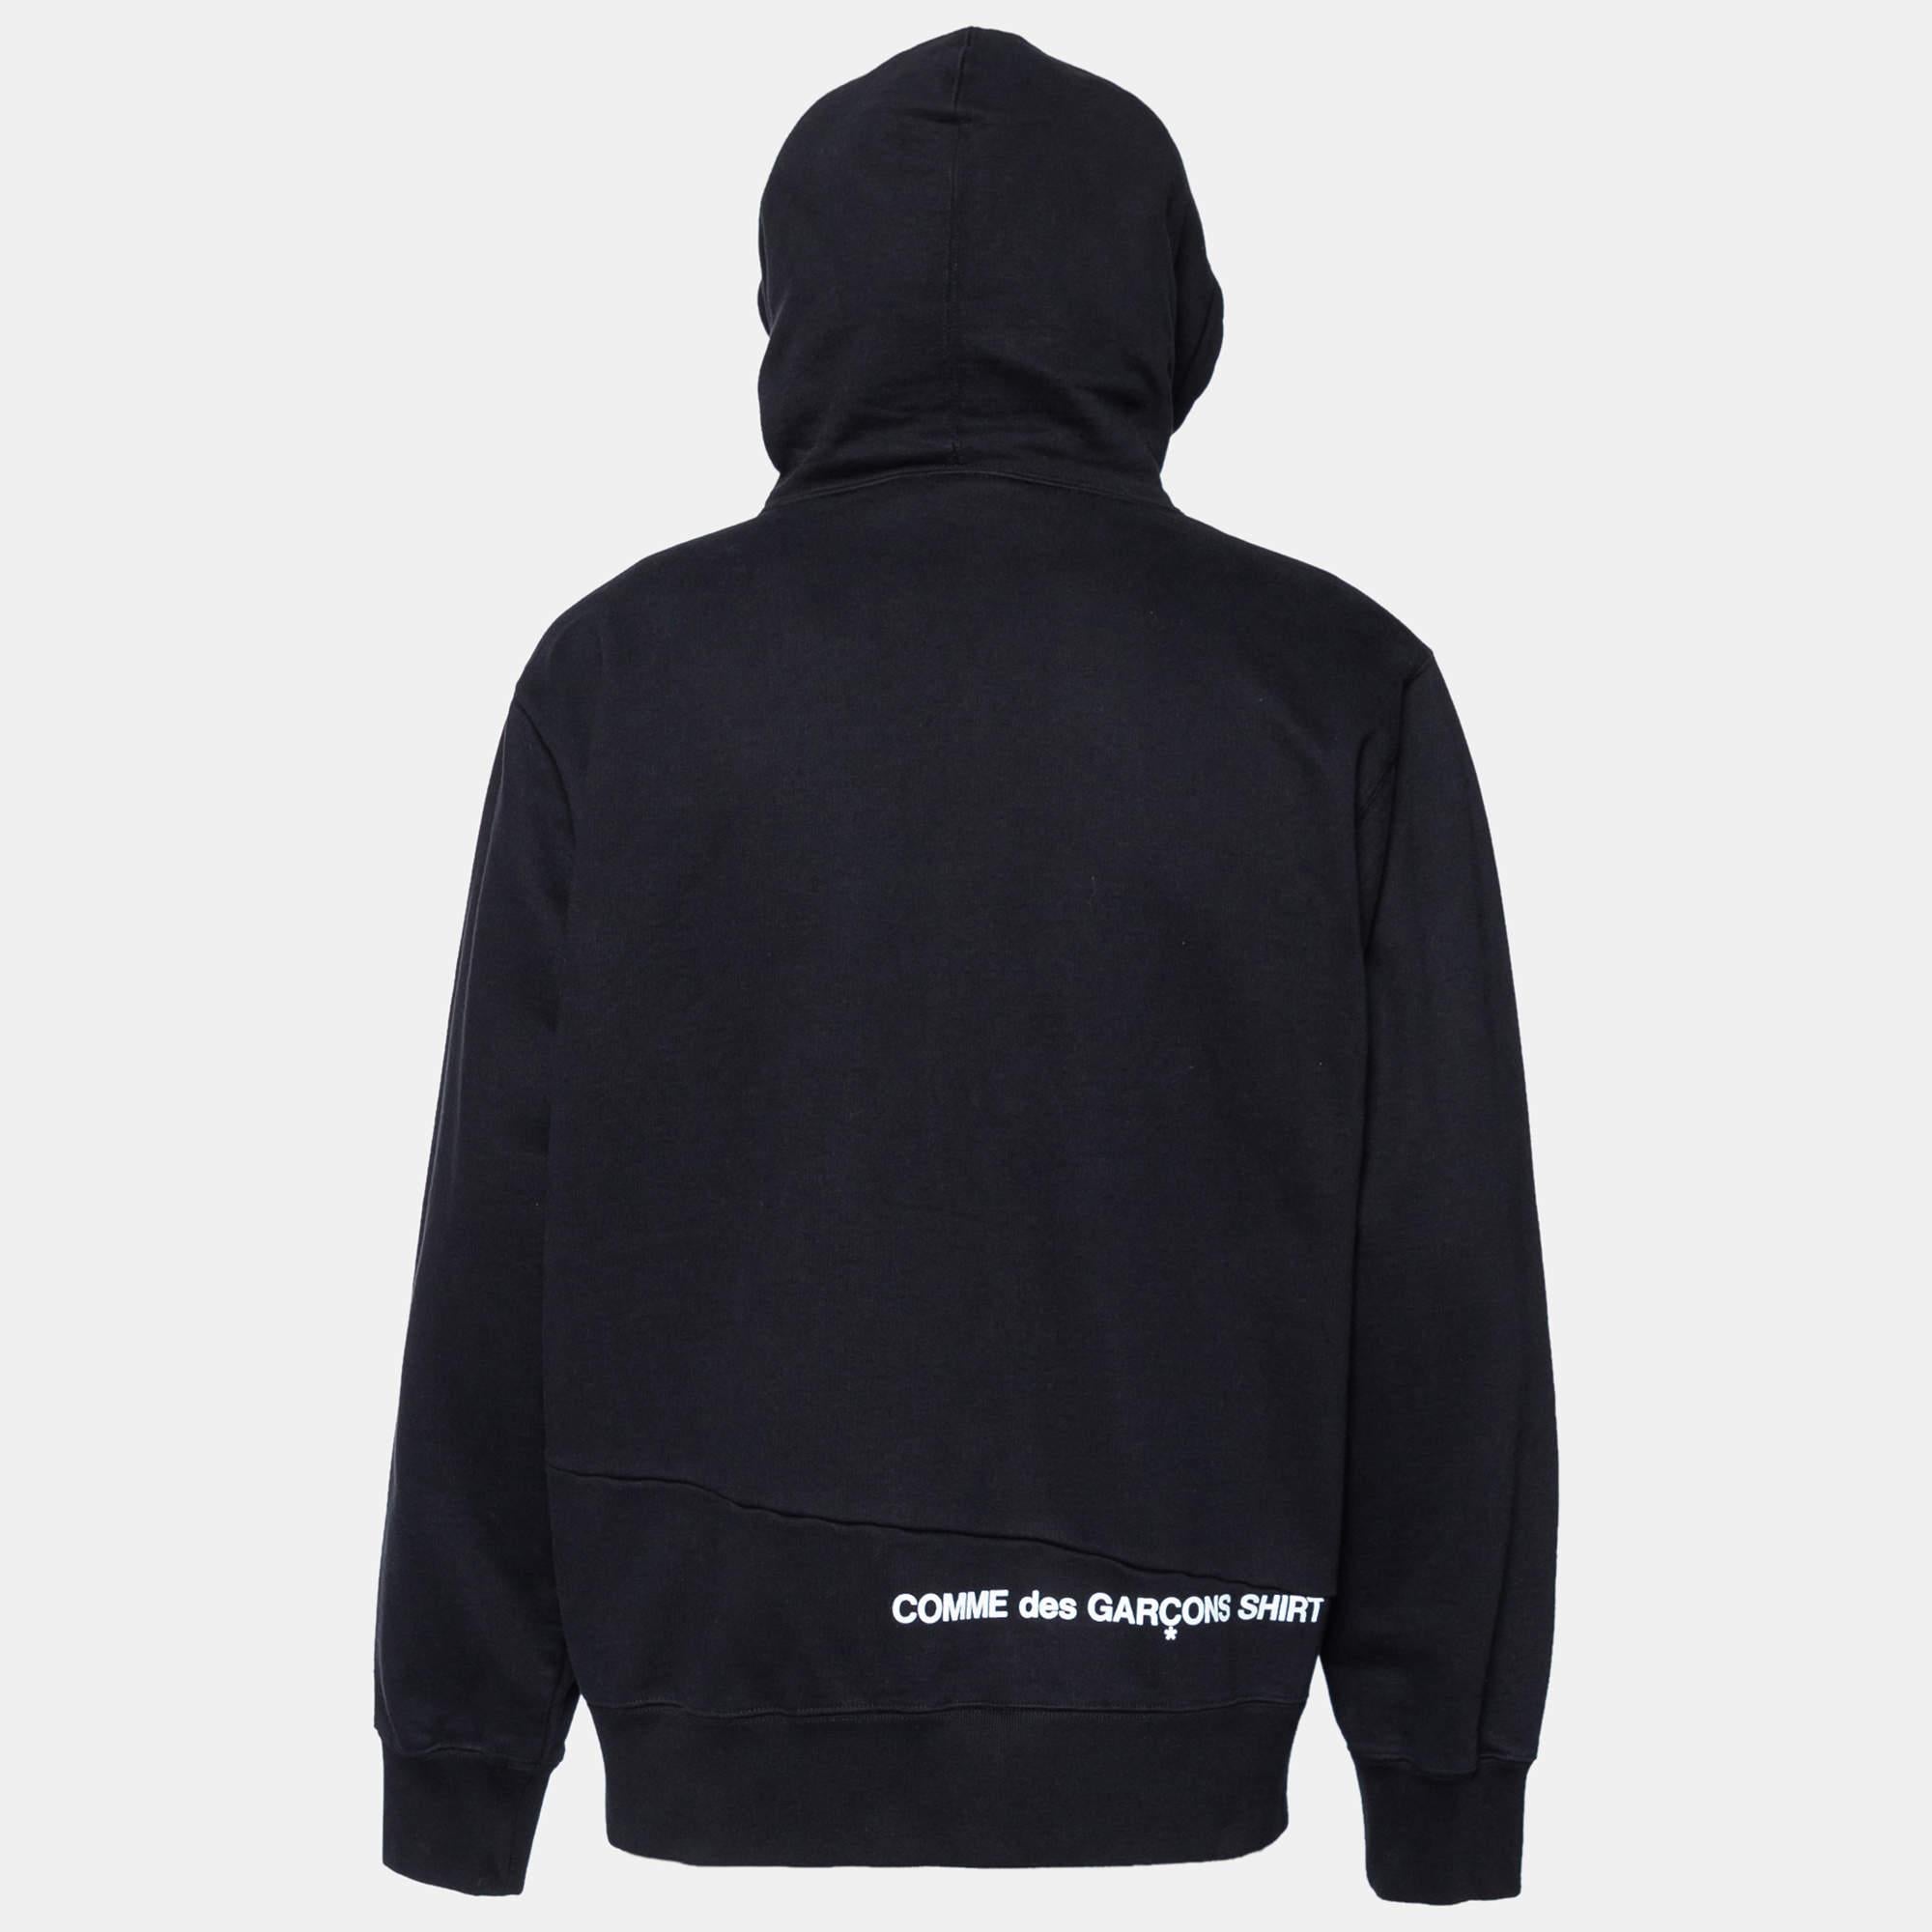 This hoodie from Supreme x Comme des Garçons is great for casual use and will help you stay comfortable. It is made from black terry knit fabric, with split detailed logos elevating its look. It has long sleeves and one pocket. Match this hoodie